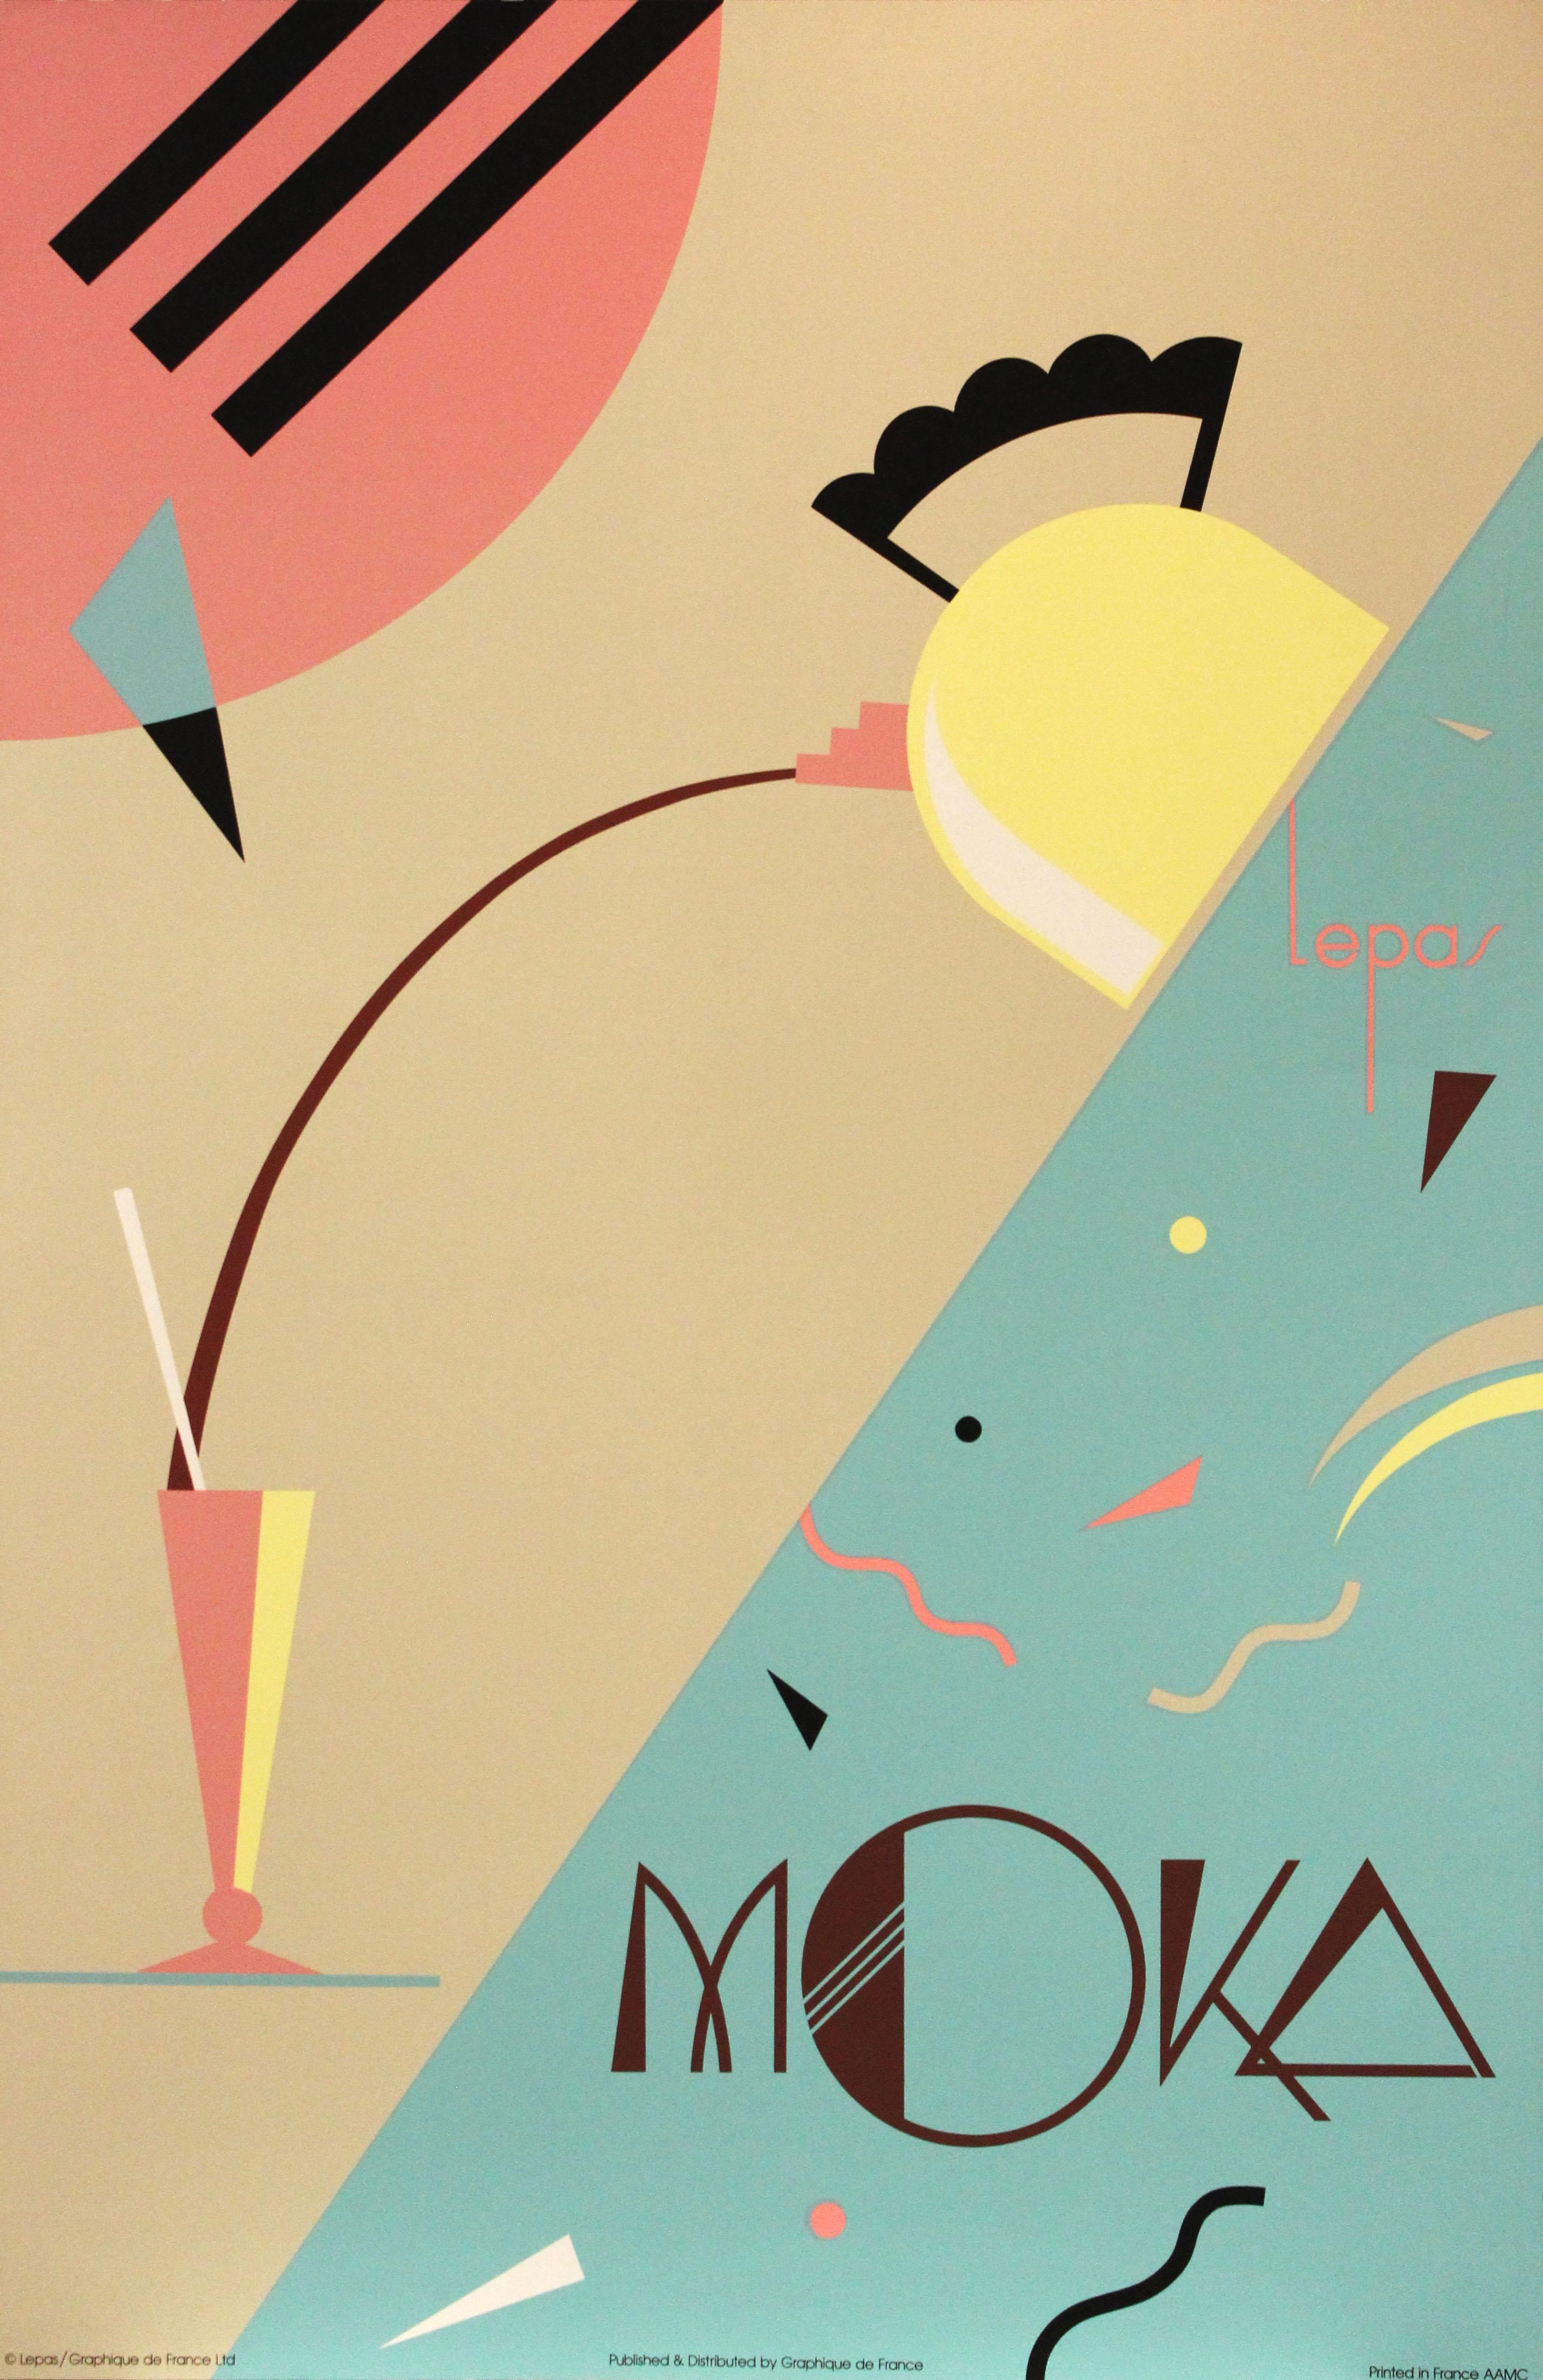 Charles Lepas Print - Poster-MOKA. Published & Distributed by Graphique de France